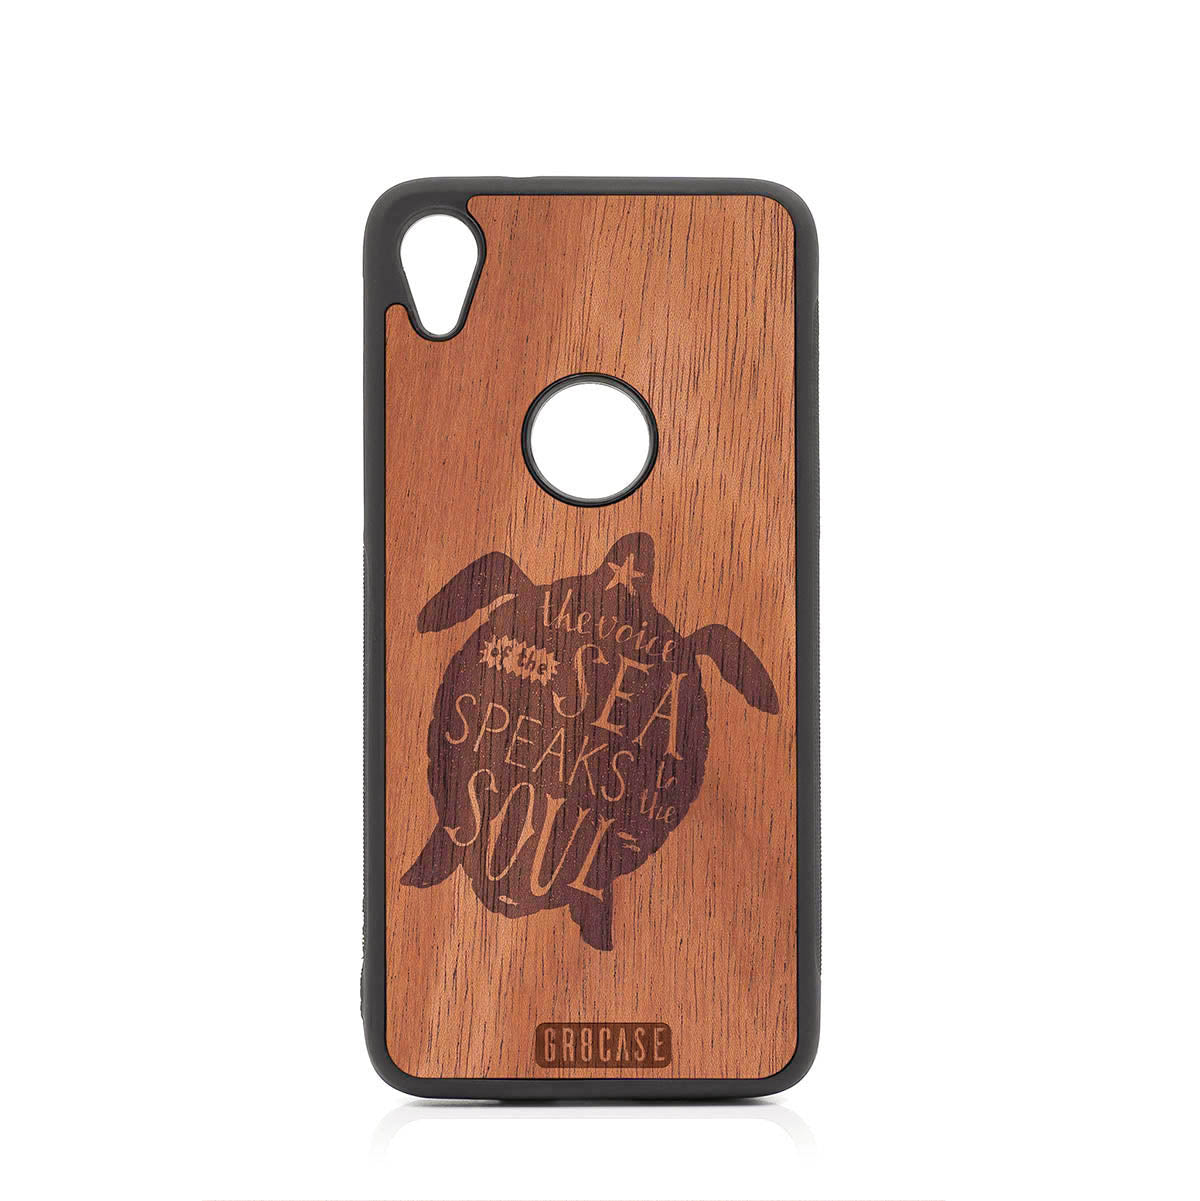 The Voice Of The Sea Speaks To The Soul (Turtle) Design Wood Case For Moto E6